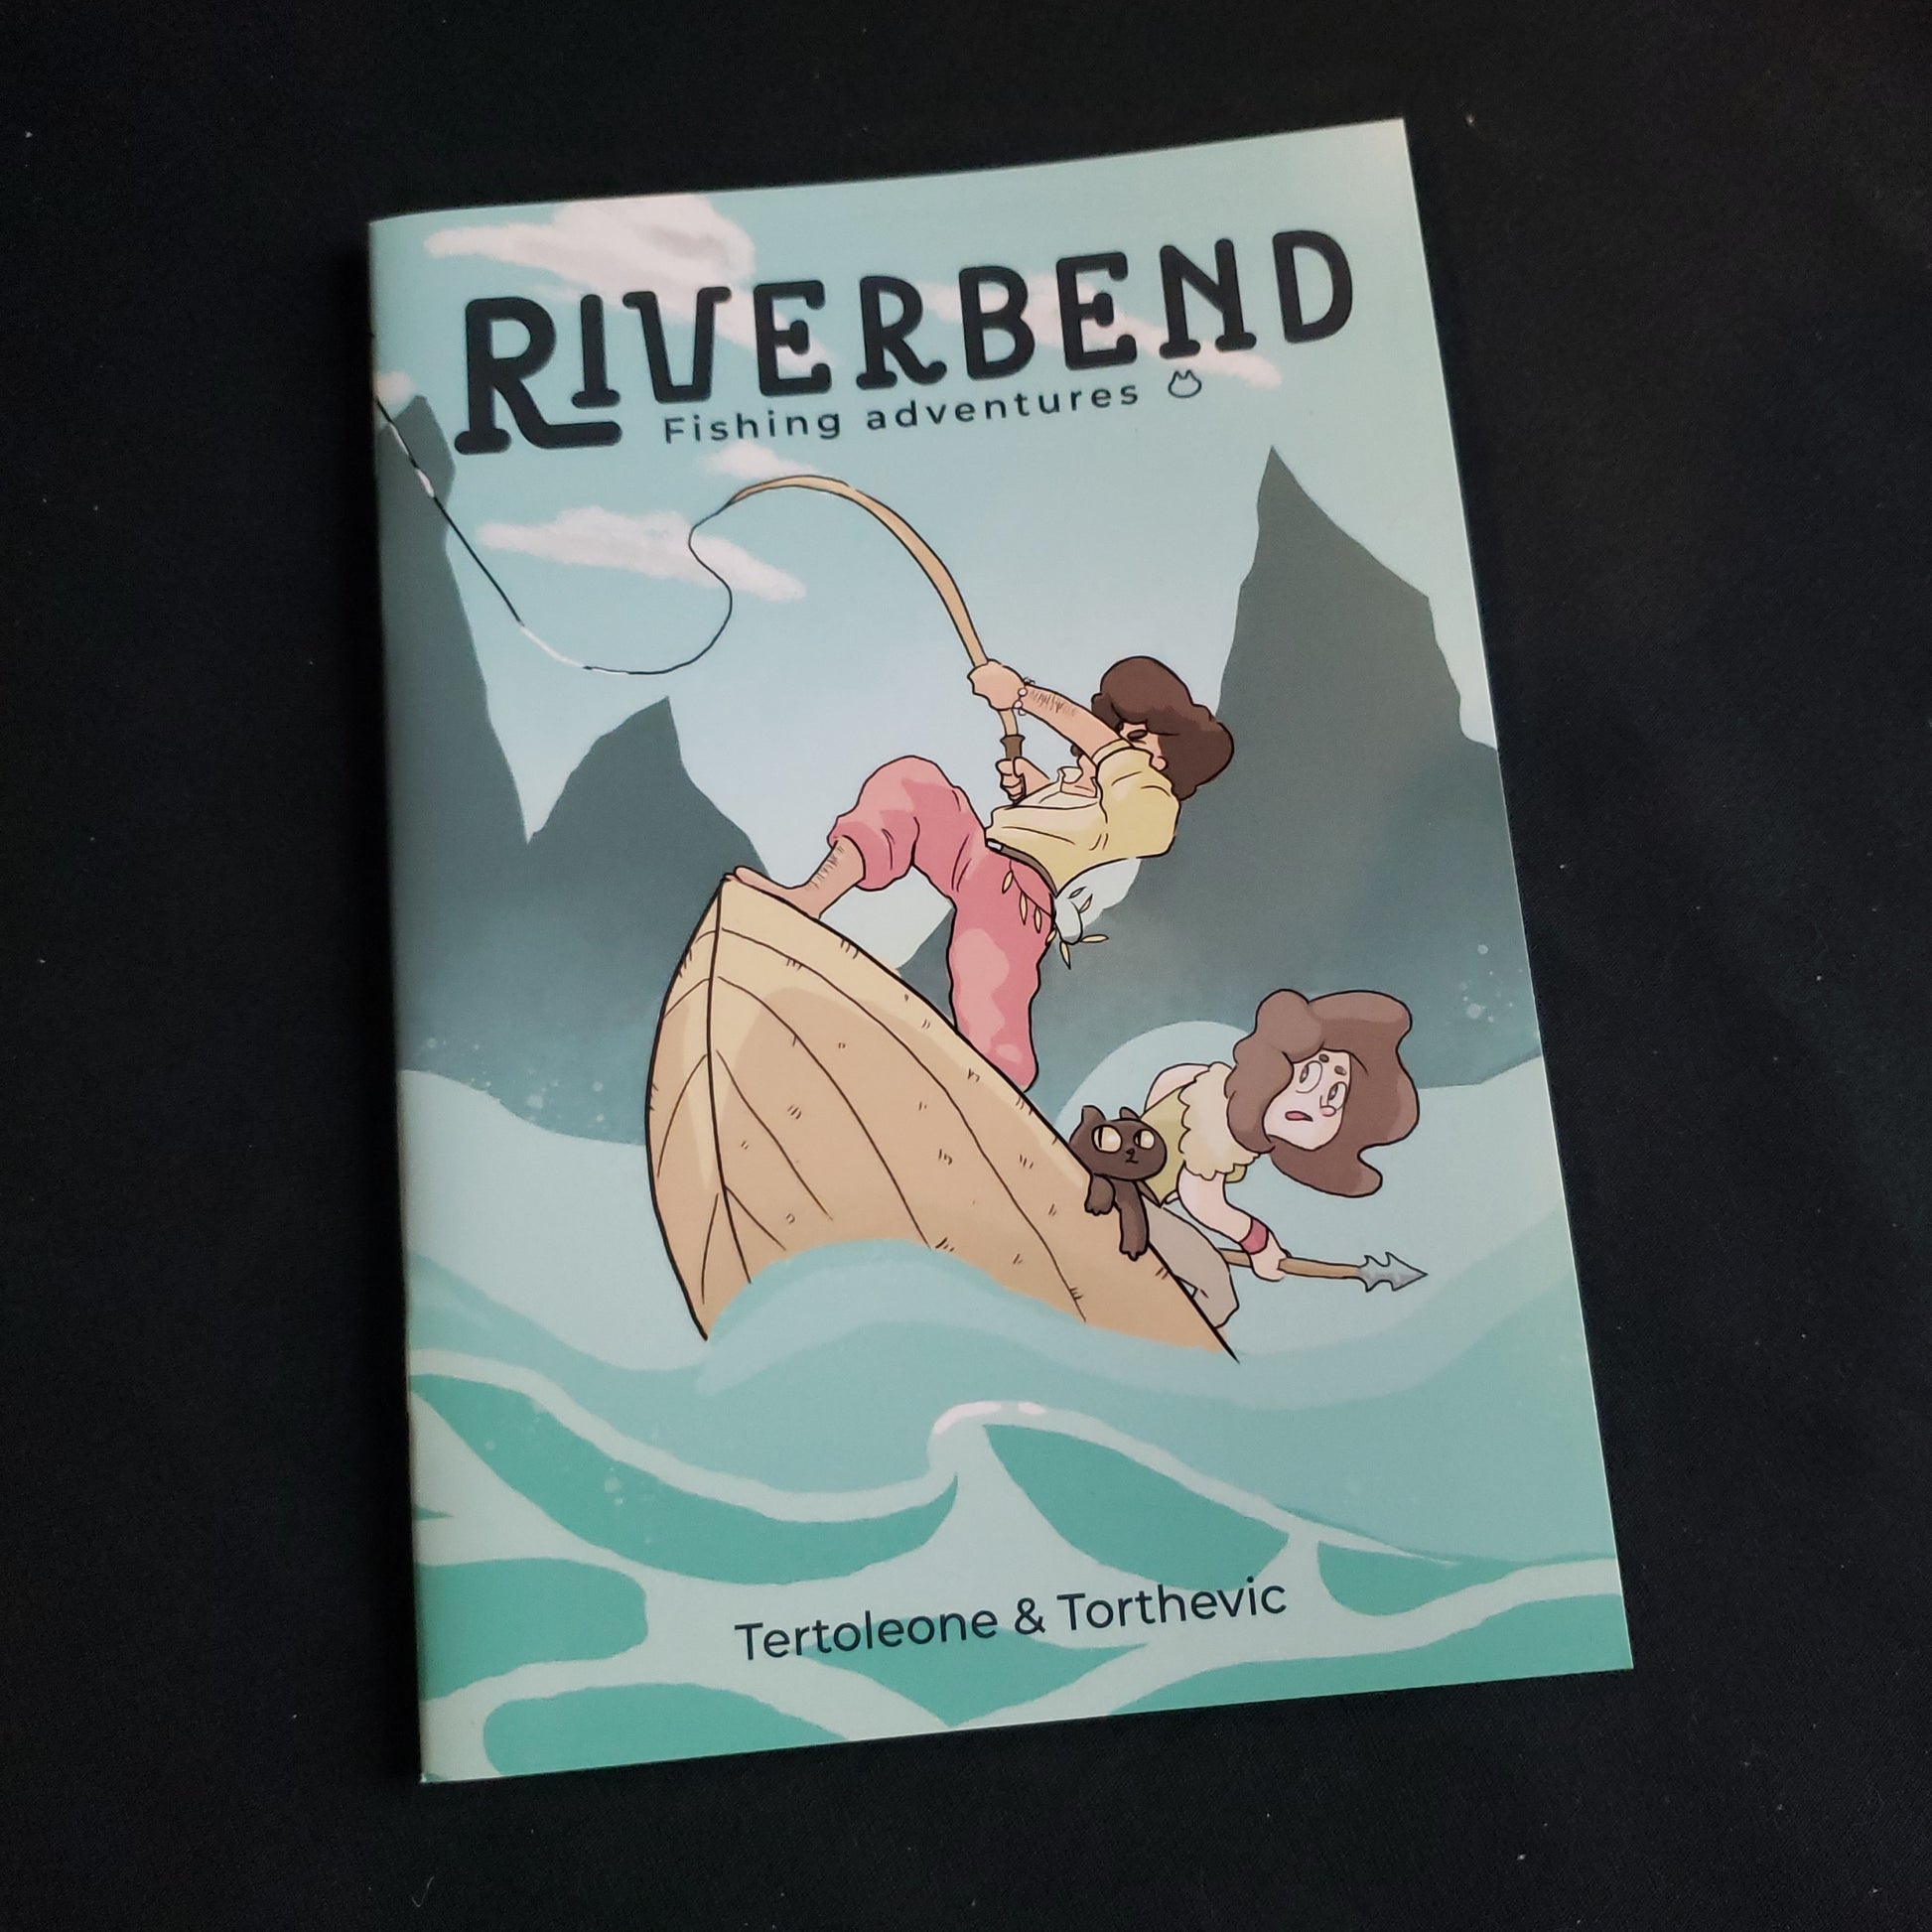 Image shows the front cover of the Riverbend: Fishing Adventures roleplaying game book